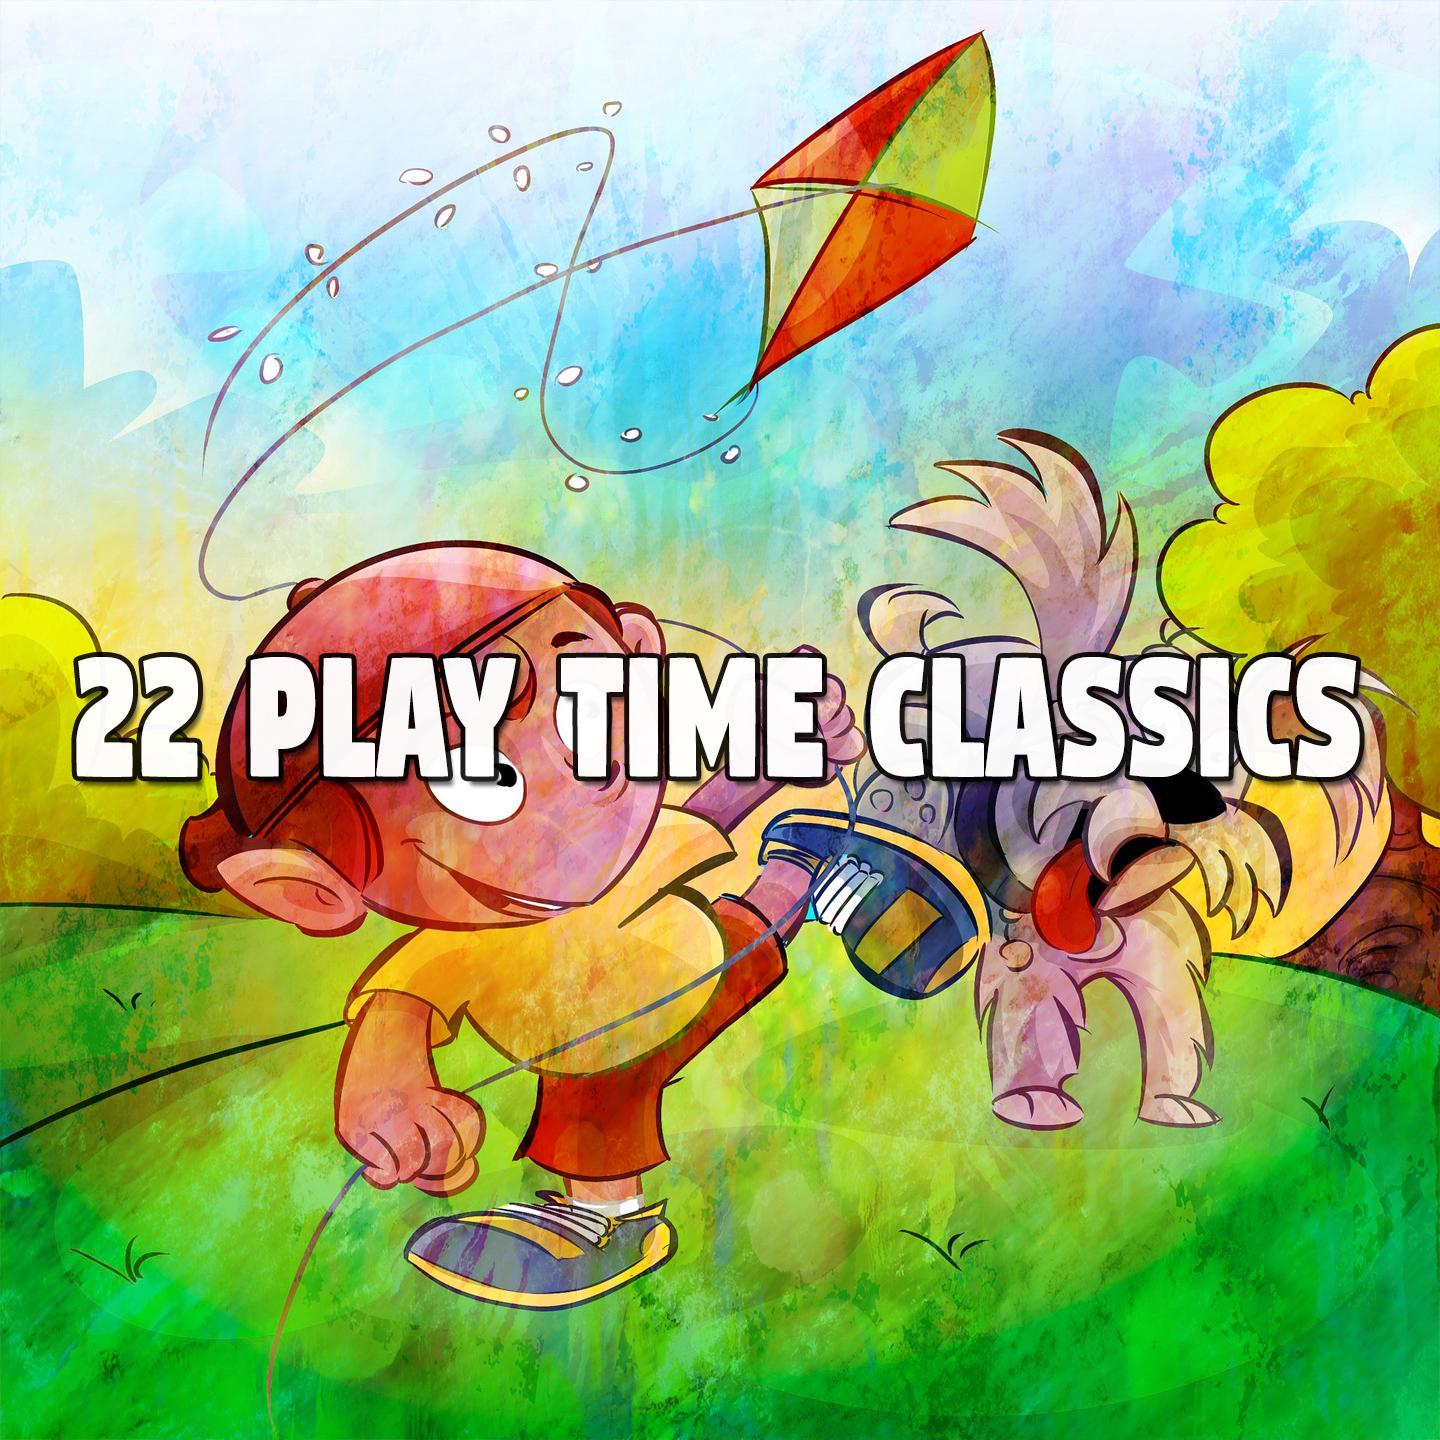 22 Play Time Classics